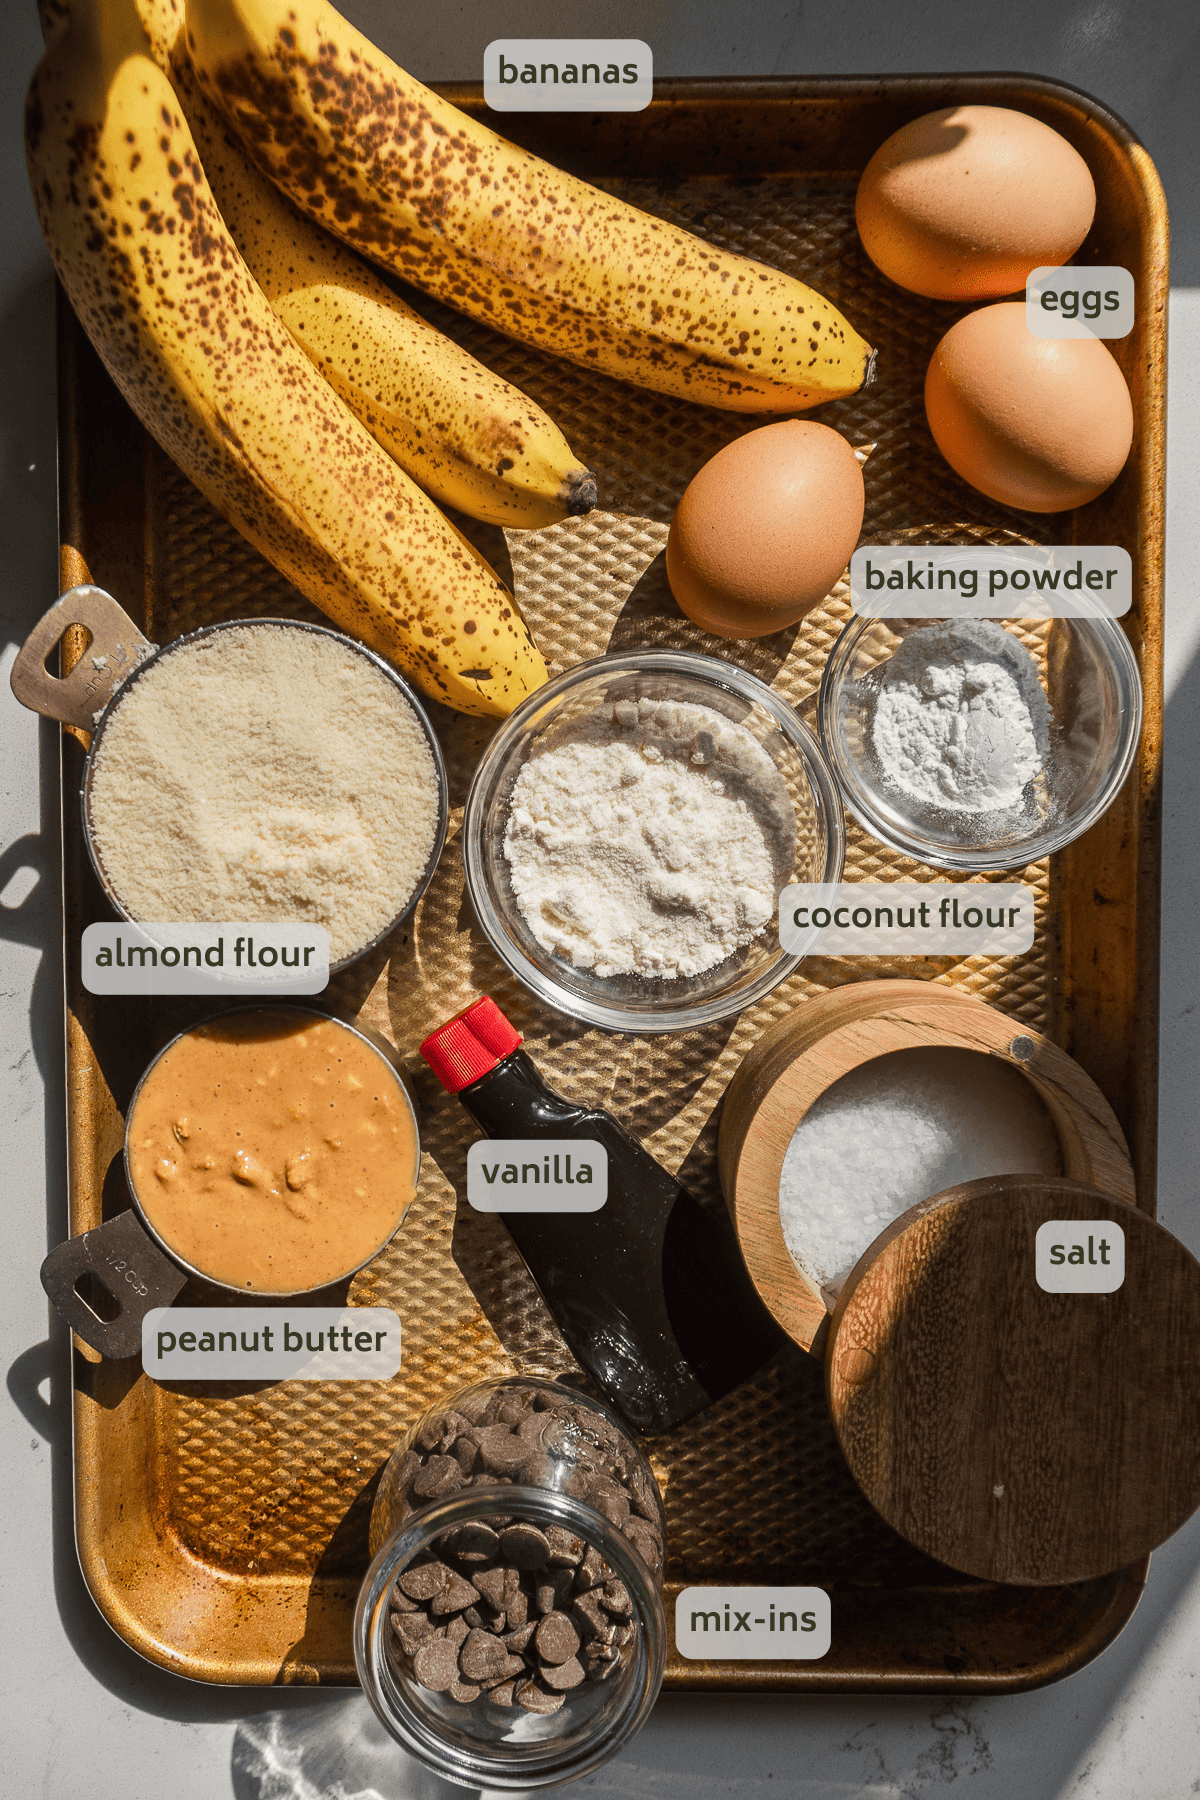 Banana bread ingredients with labels on a gold baking sheet.